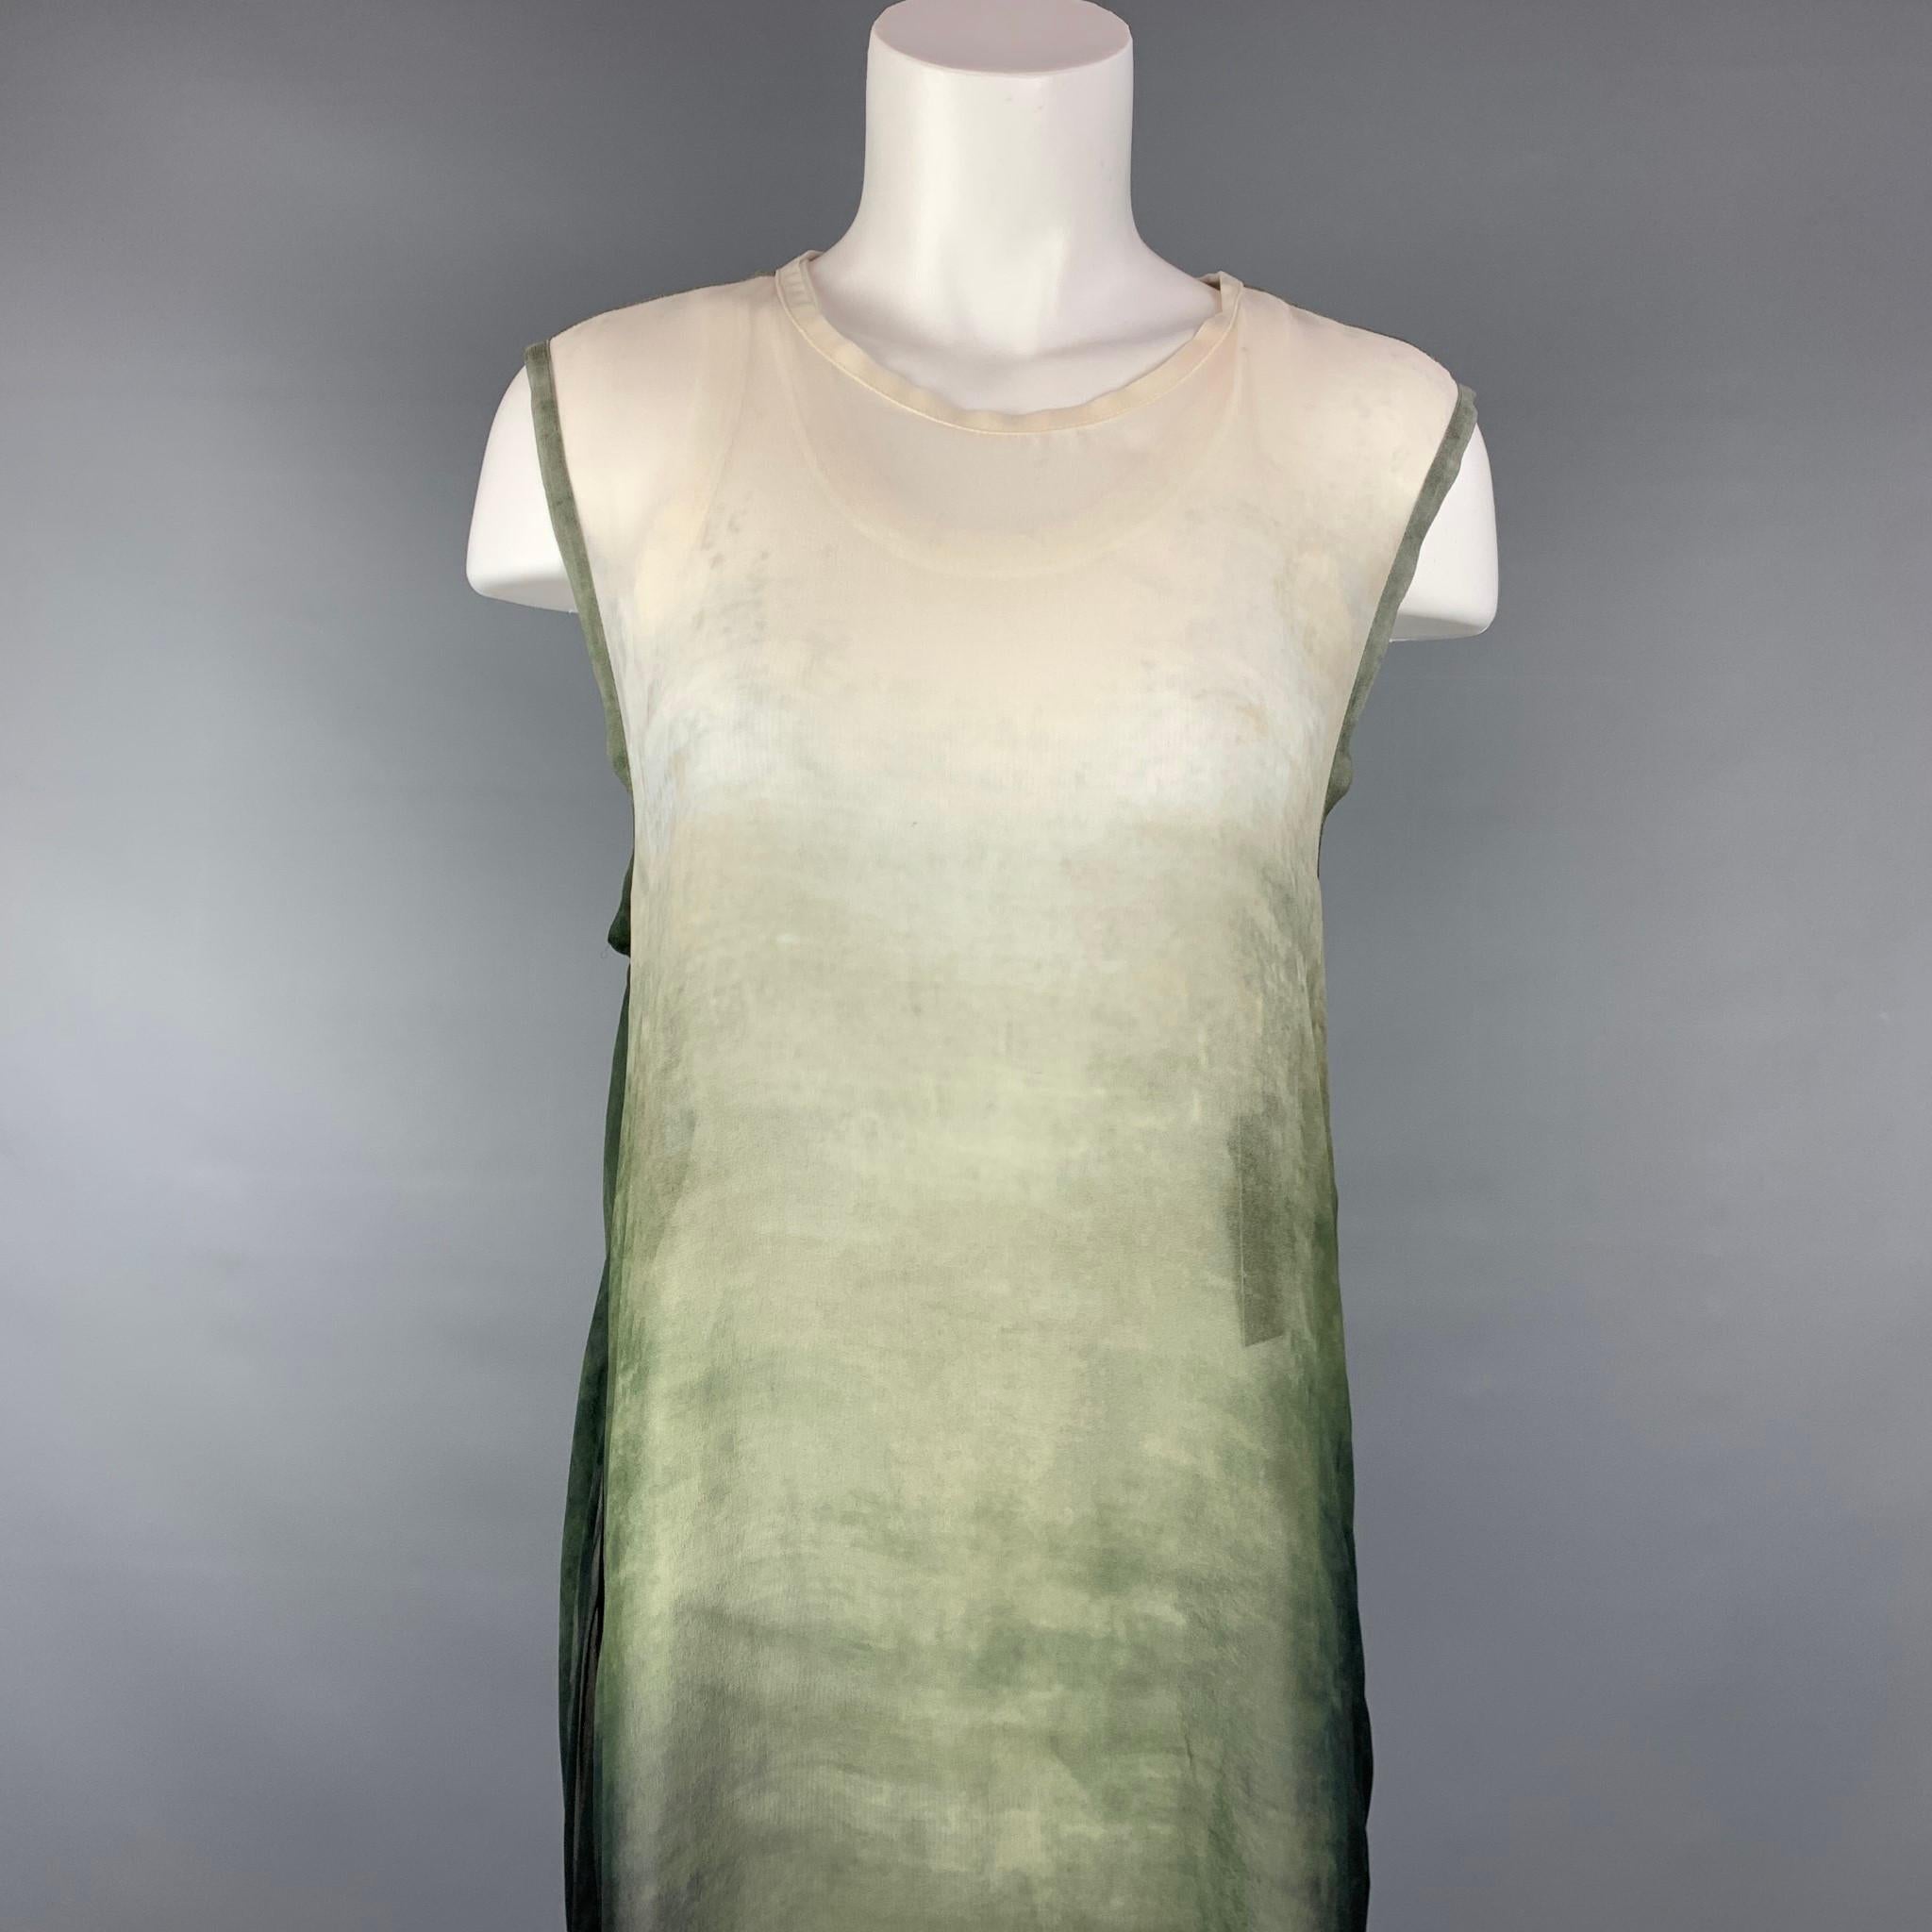 ANN DEMEULEMEESTER dress comes in a green & white ombre modal / cashmere with a white tank top liner featuring a ruched back, sleeveless, and a back buttoned closure. 

Very Good Pre-Owned Condition.
Marked: 36

Measurements:

Shoulder: 16 in.
Bust: